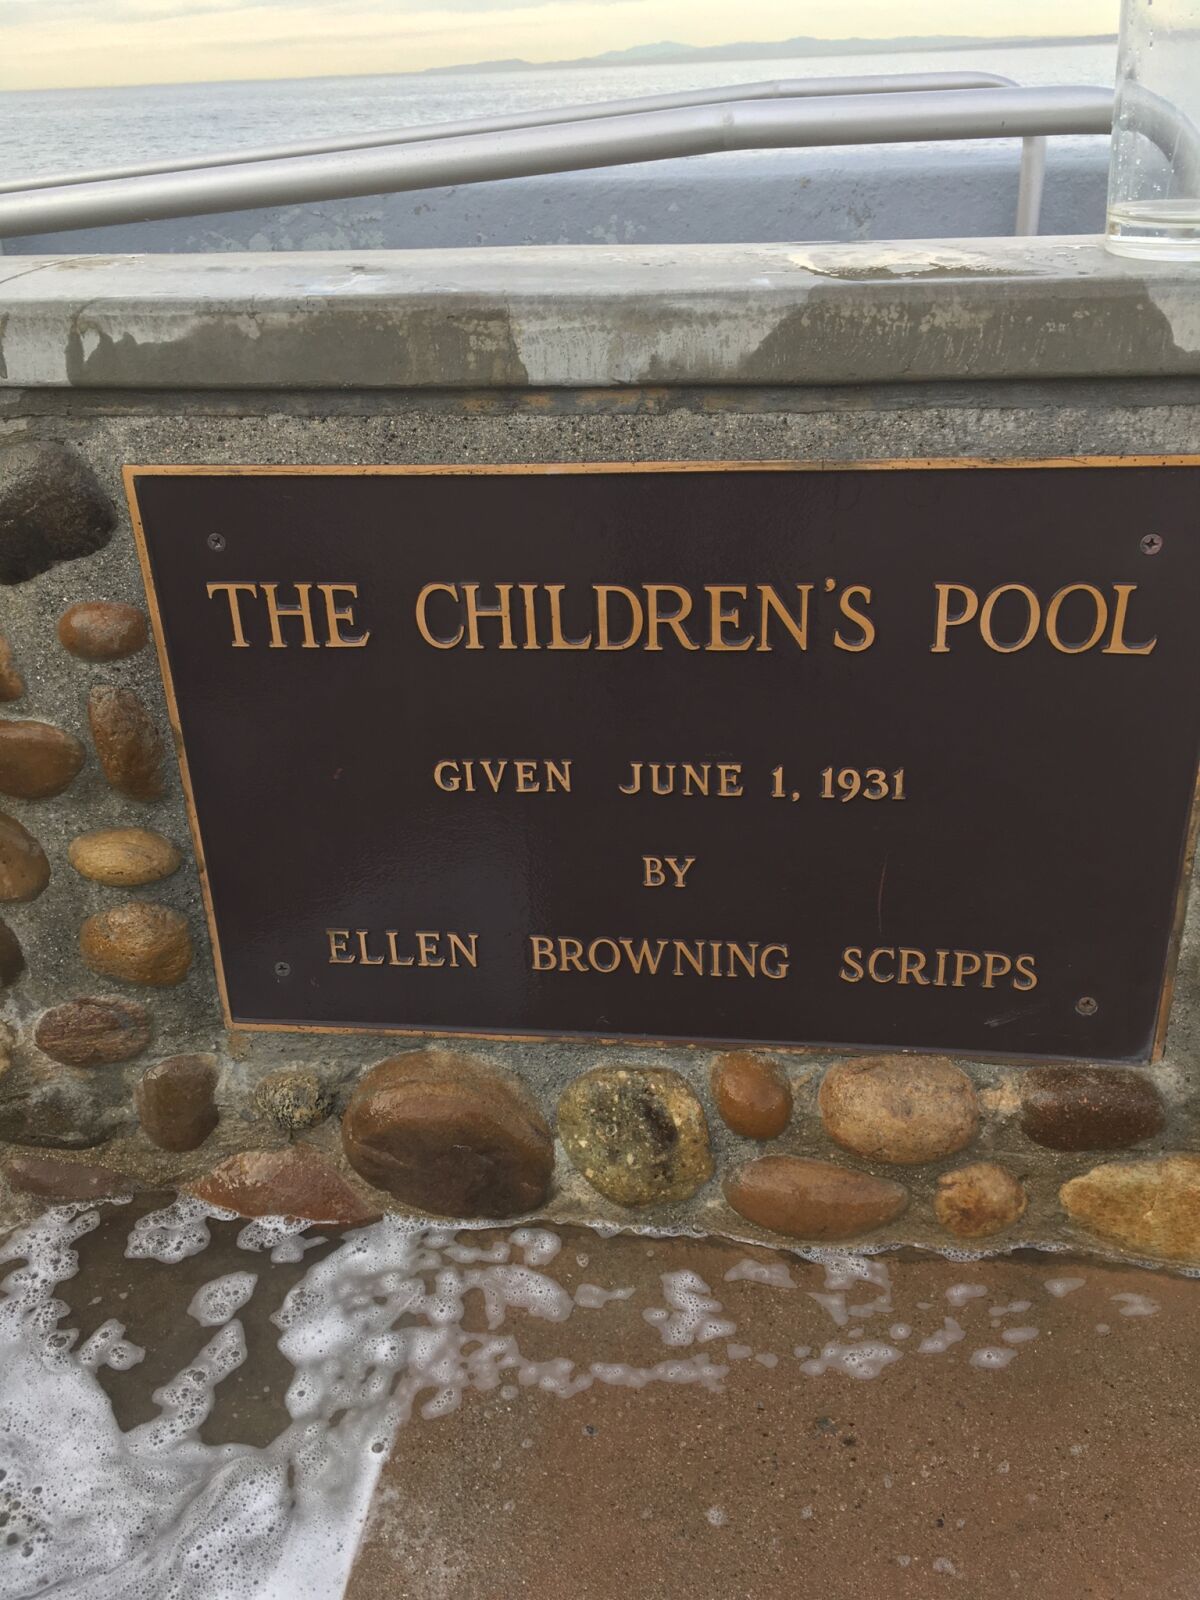 The Children's Pool plaque after it was cleaned.